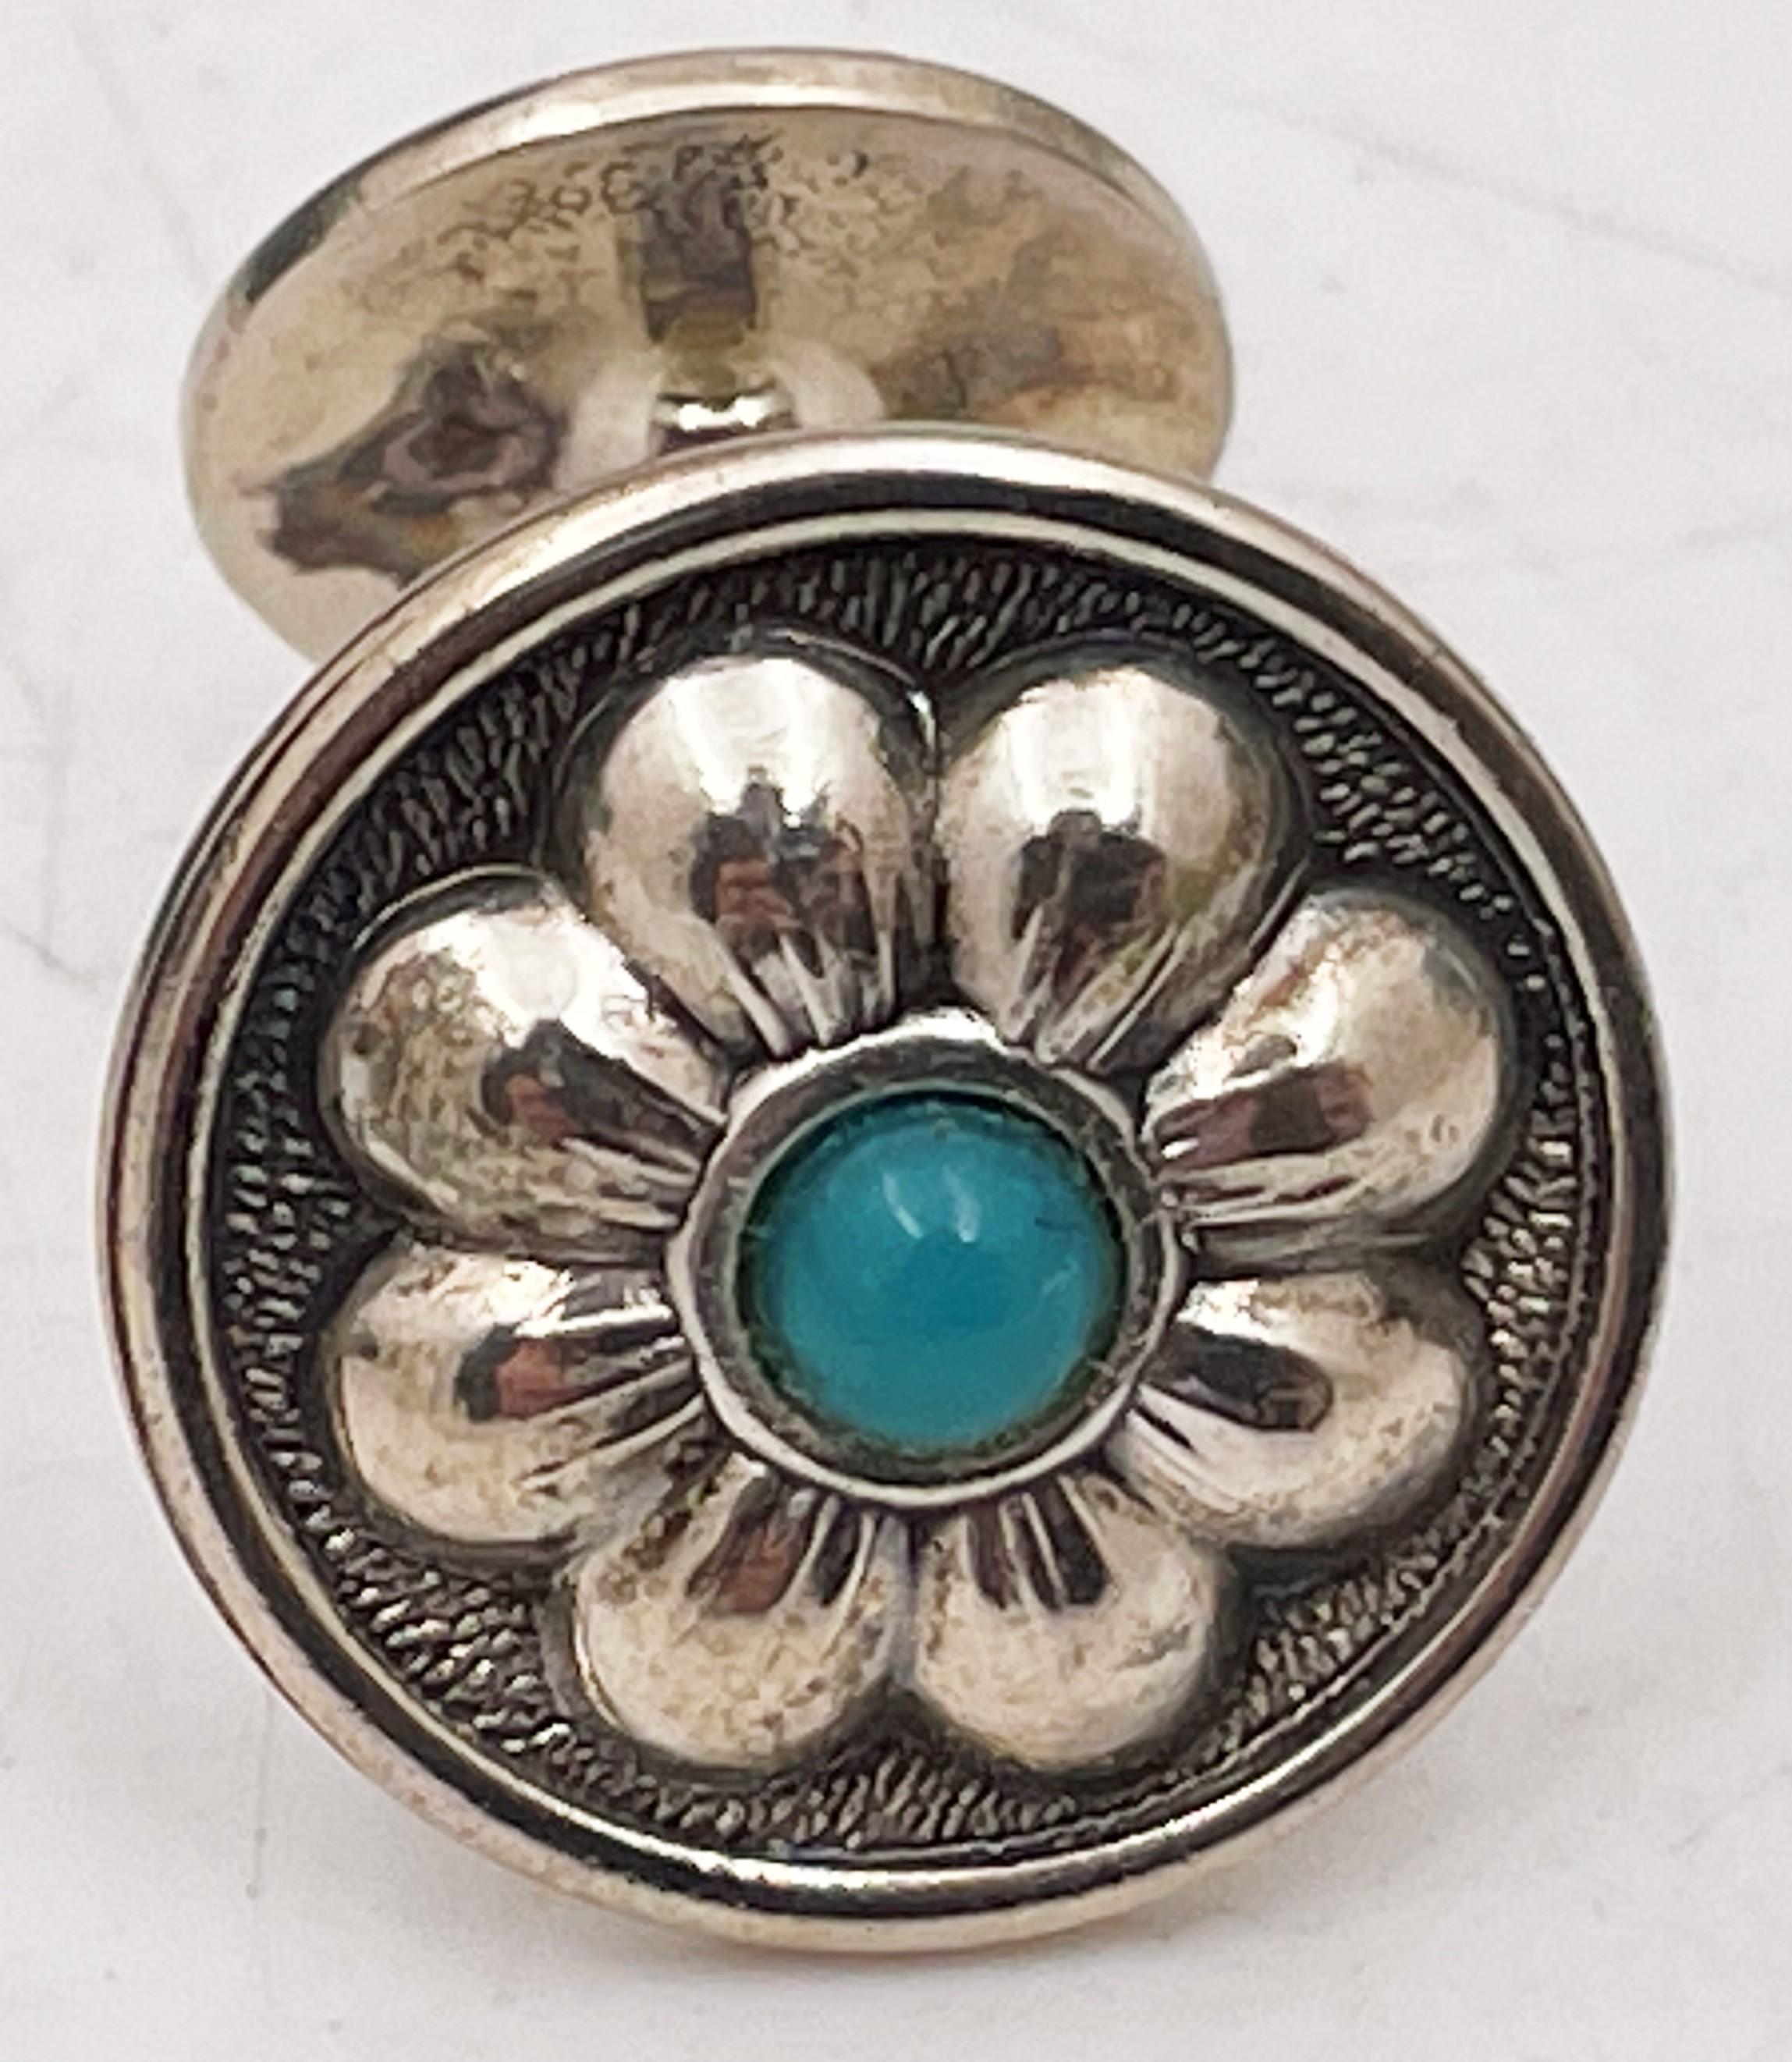 Gianmaria Buccellati, Italian, pair of sterling silver cufflinks with turquoise at the center, in a beautiful floral motif, measuring 2/3'' in diameter, and bearing hallmarks. Sold in its original box, never used. 

Mario Buccellati, the founder